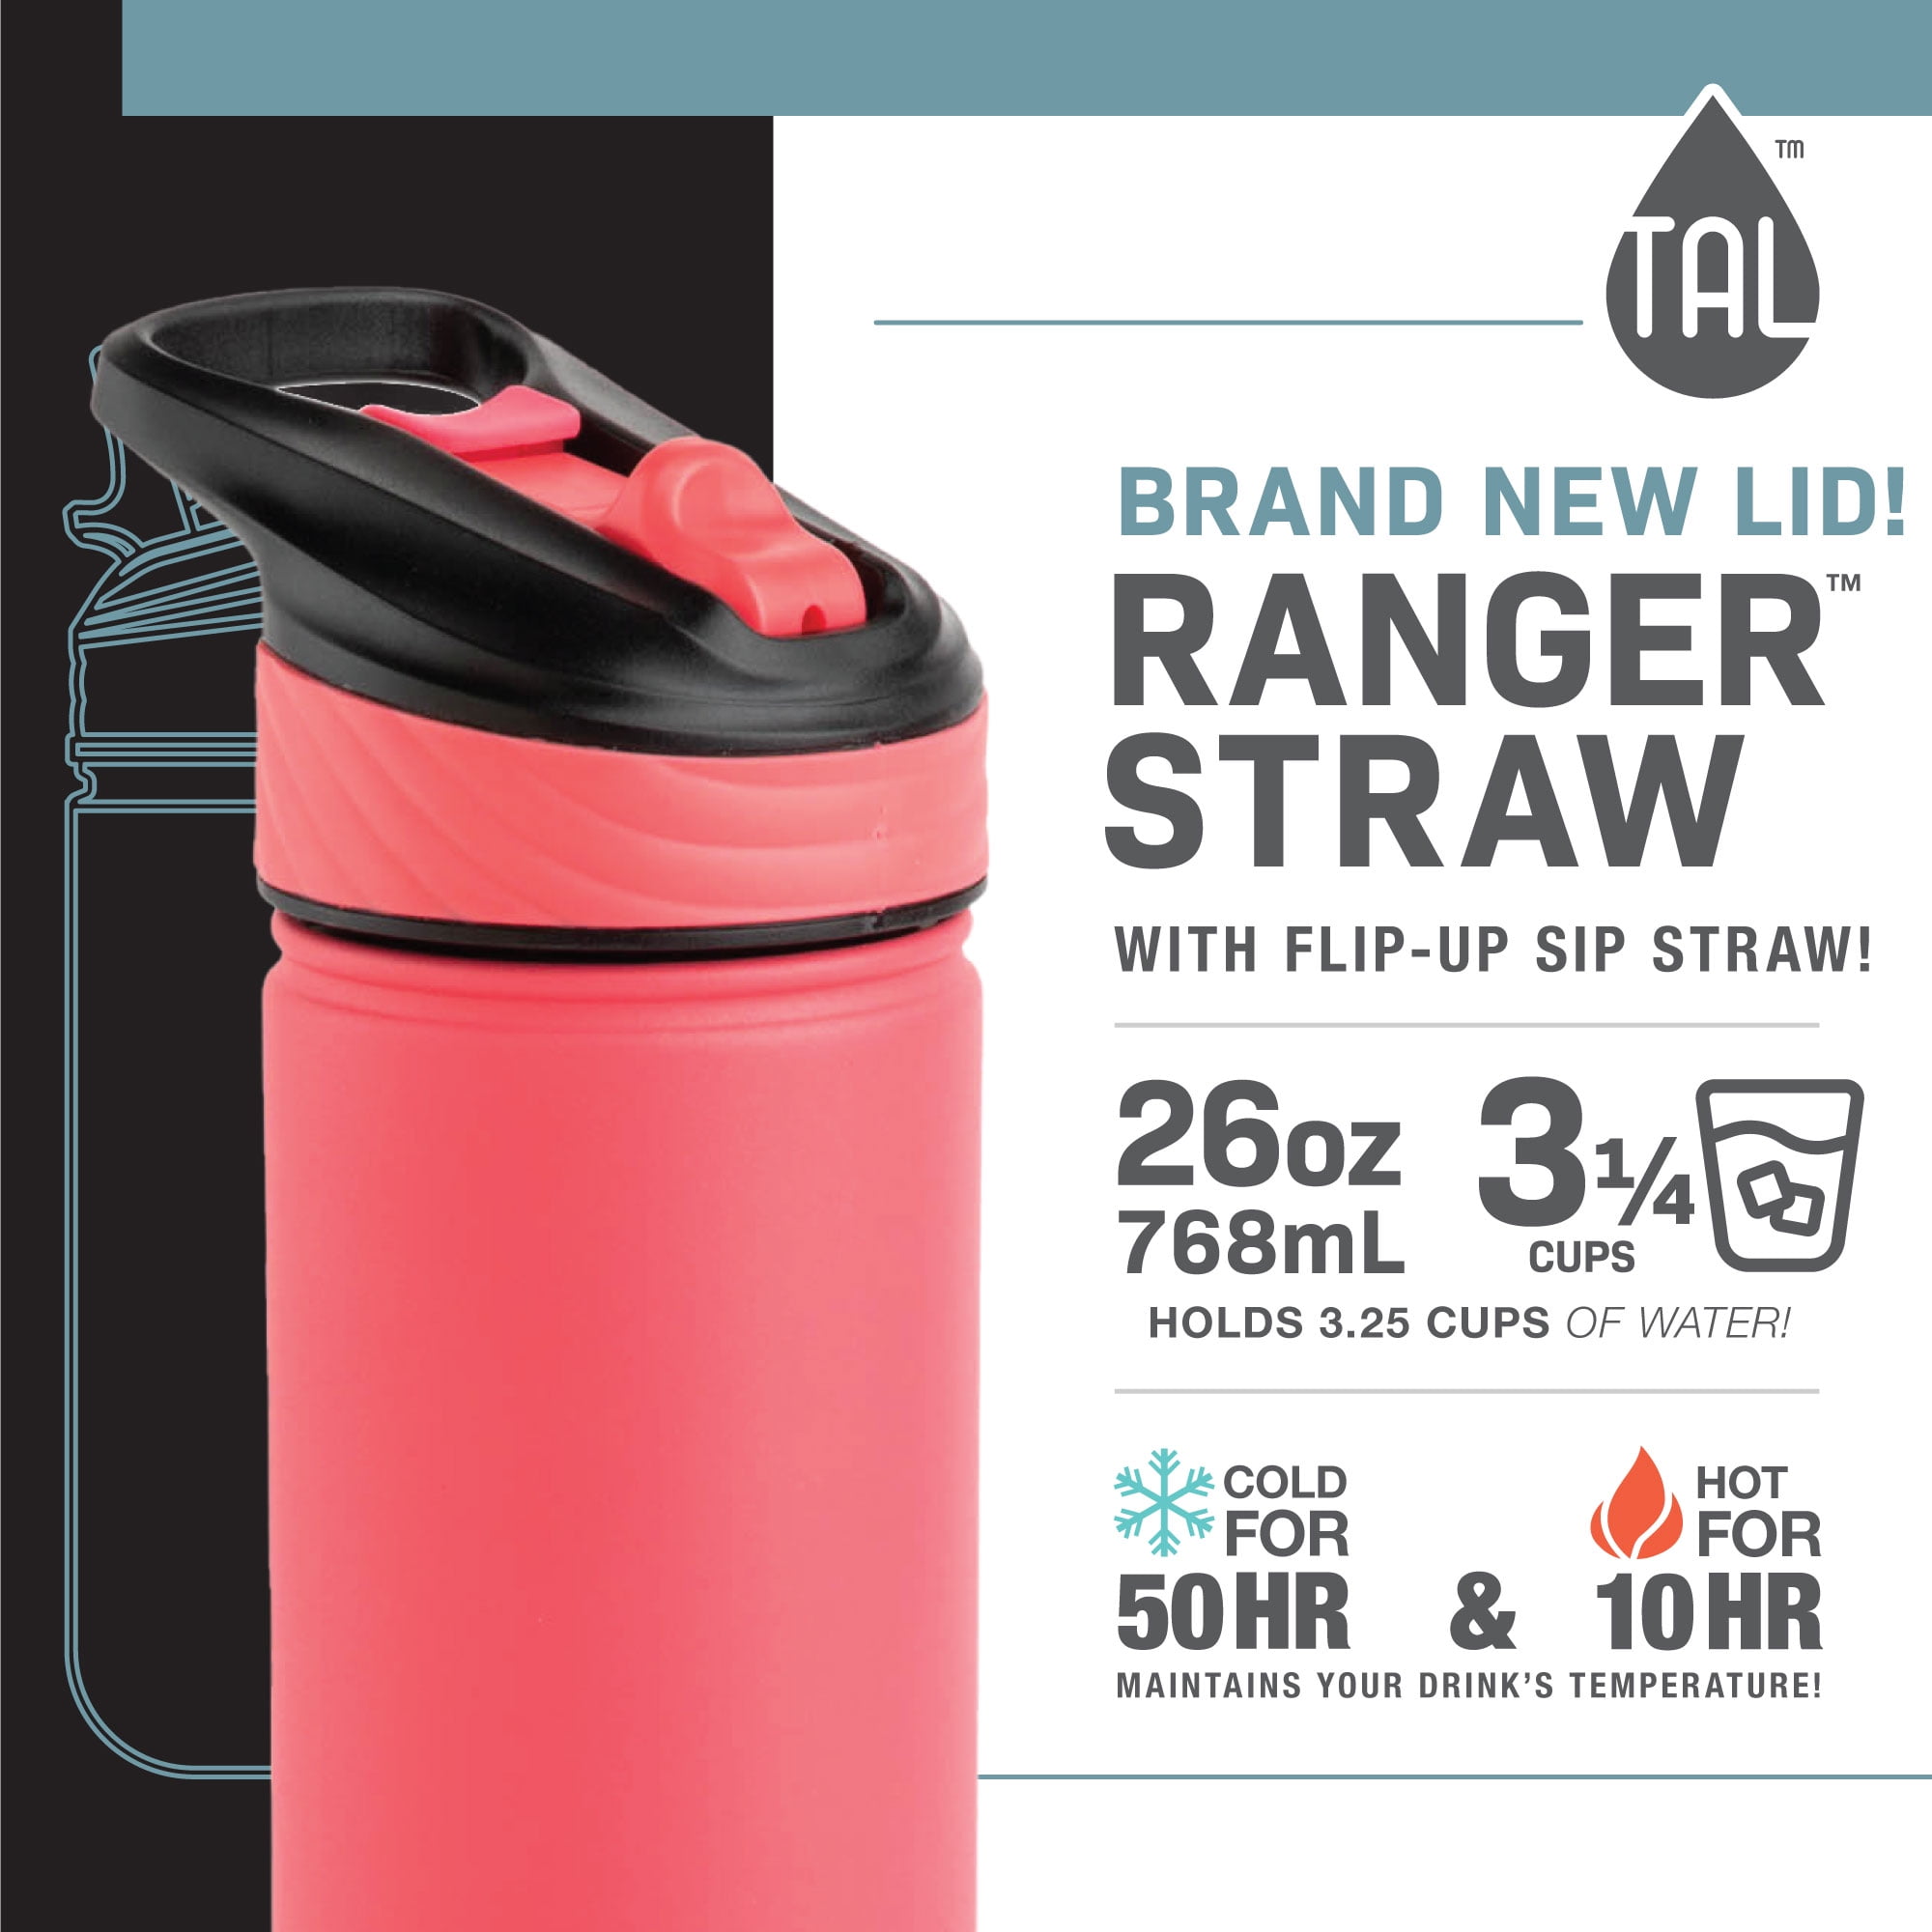 TAL Stainless Steel Ranger Water Bottle 26 oz, Bright Pink - Yahoo Shopping